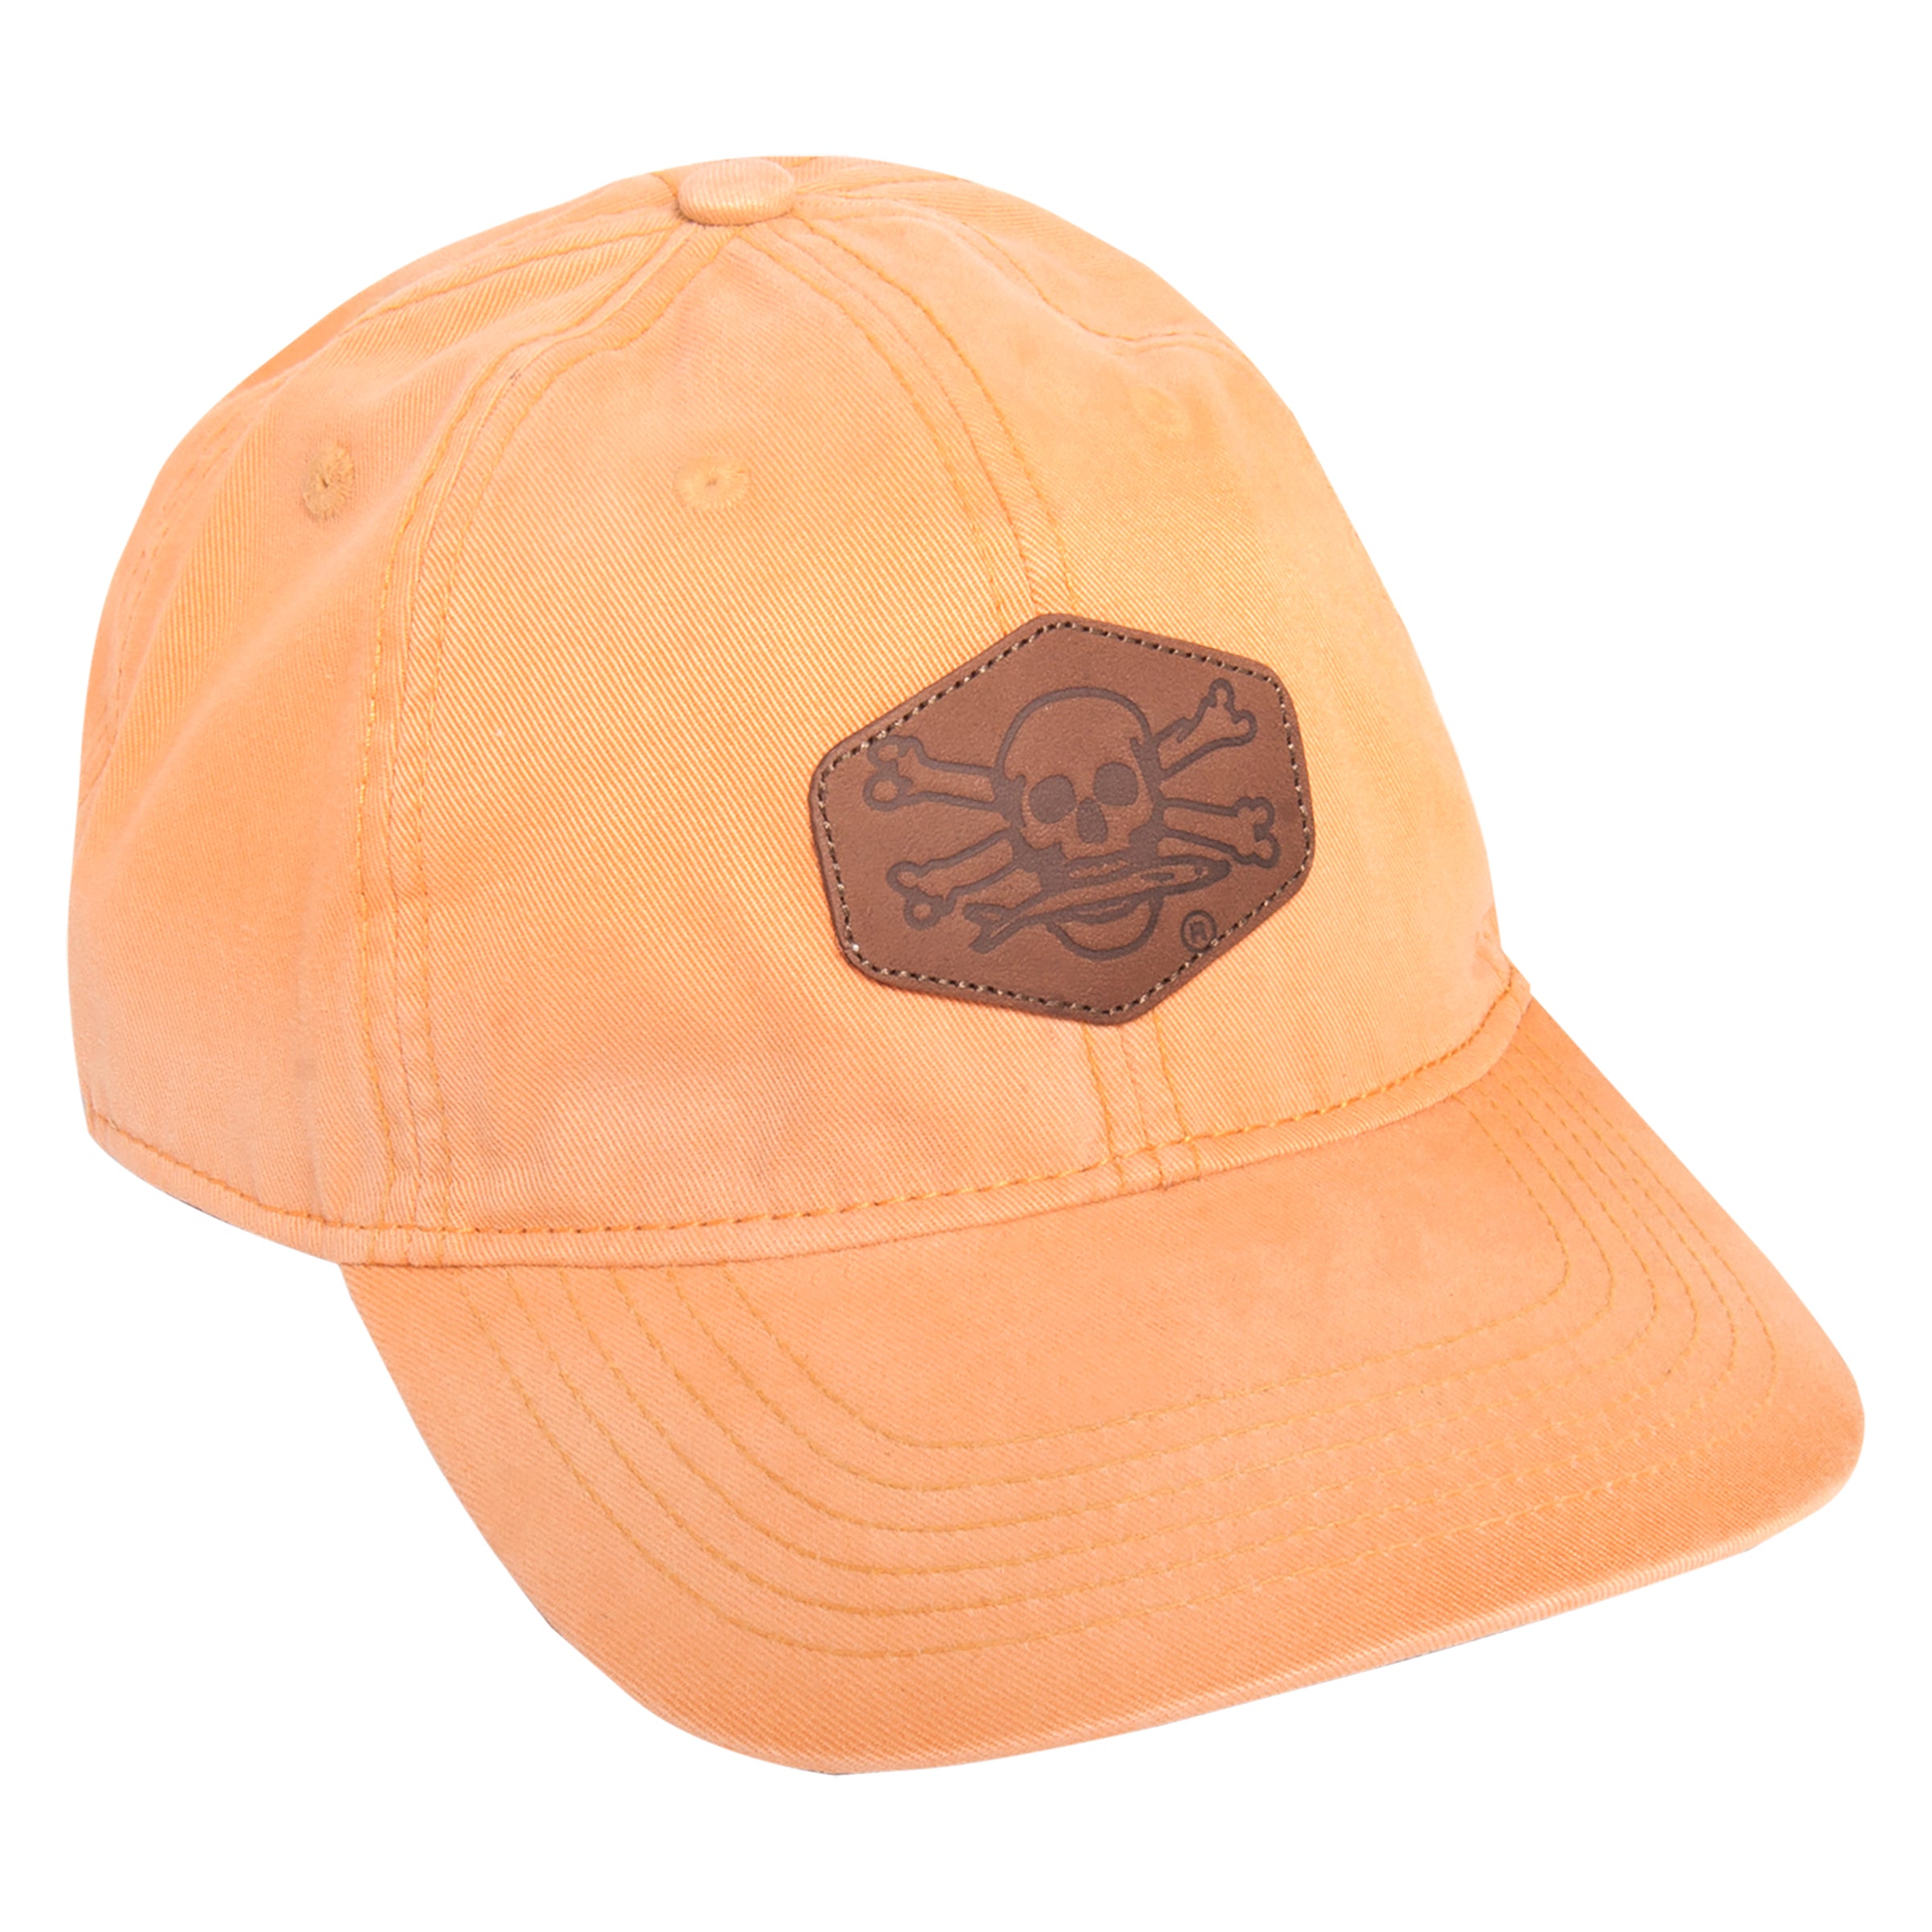 Orange Calcutta hat with leather patch